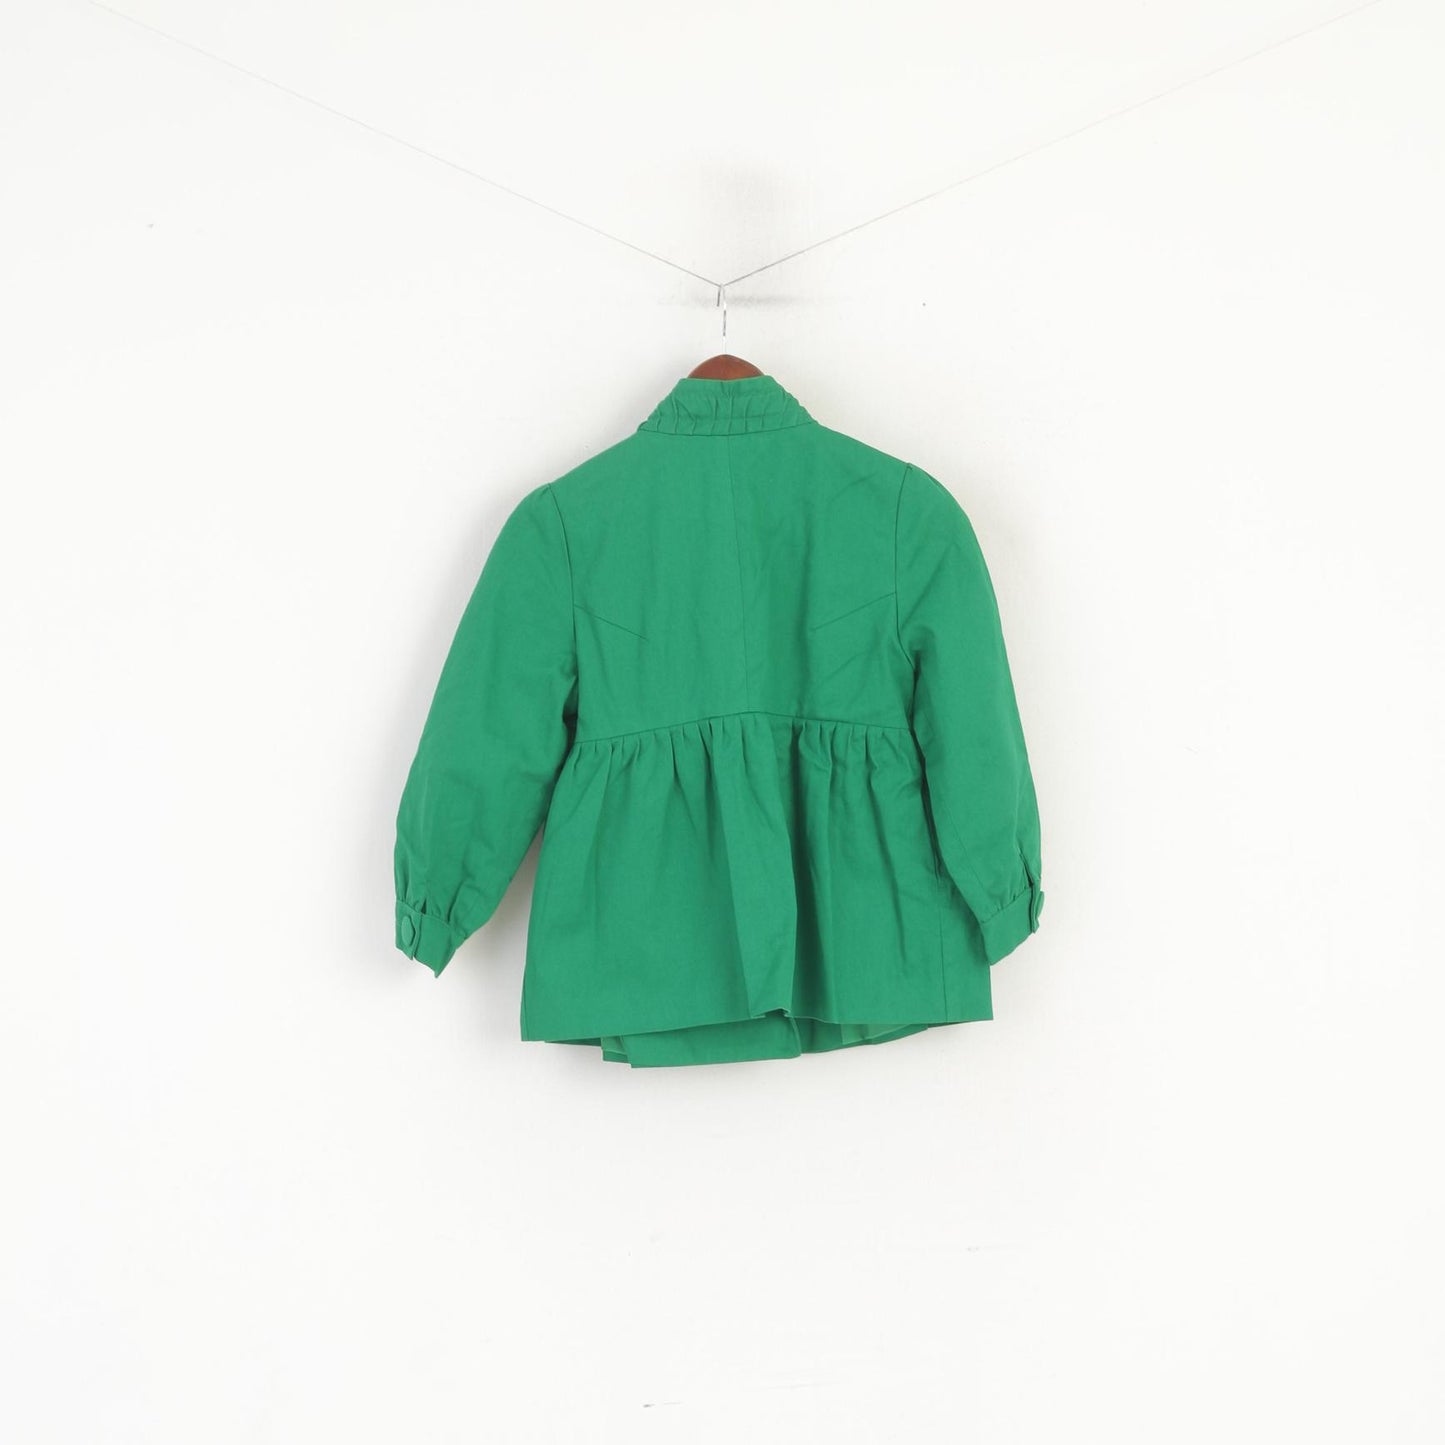 Topshop Women 10 S Jacket Green Baby Doll Cotton Corpped Elagant 3/4 Sleeve Top